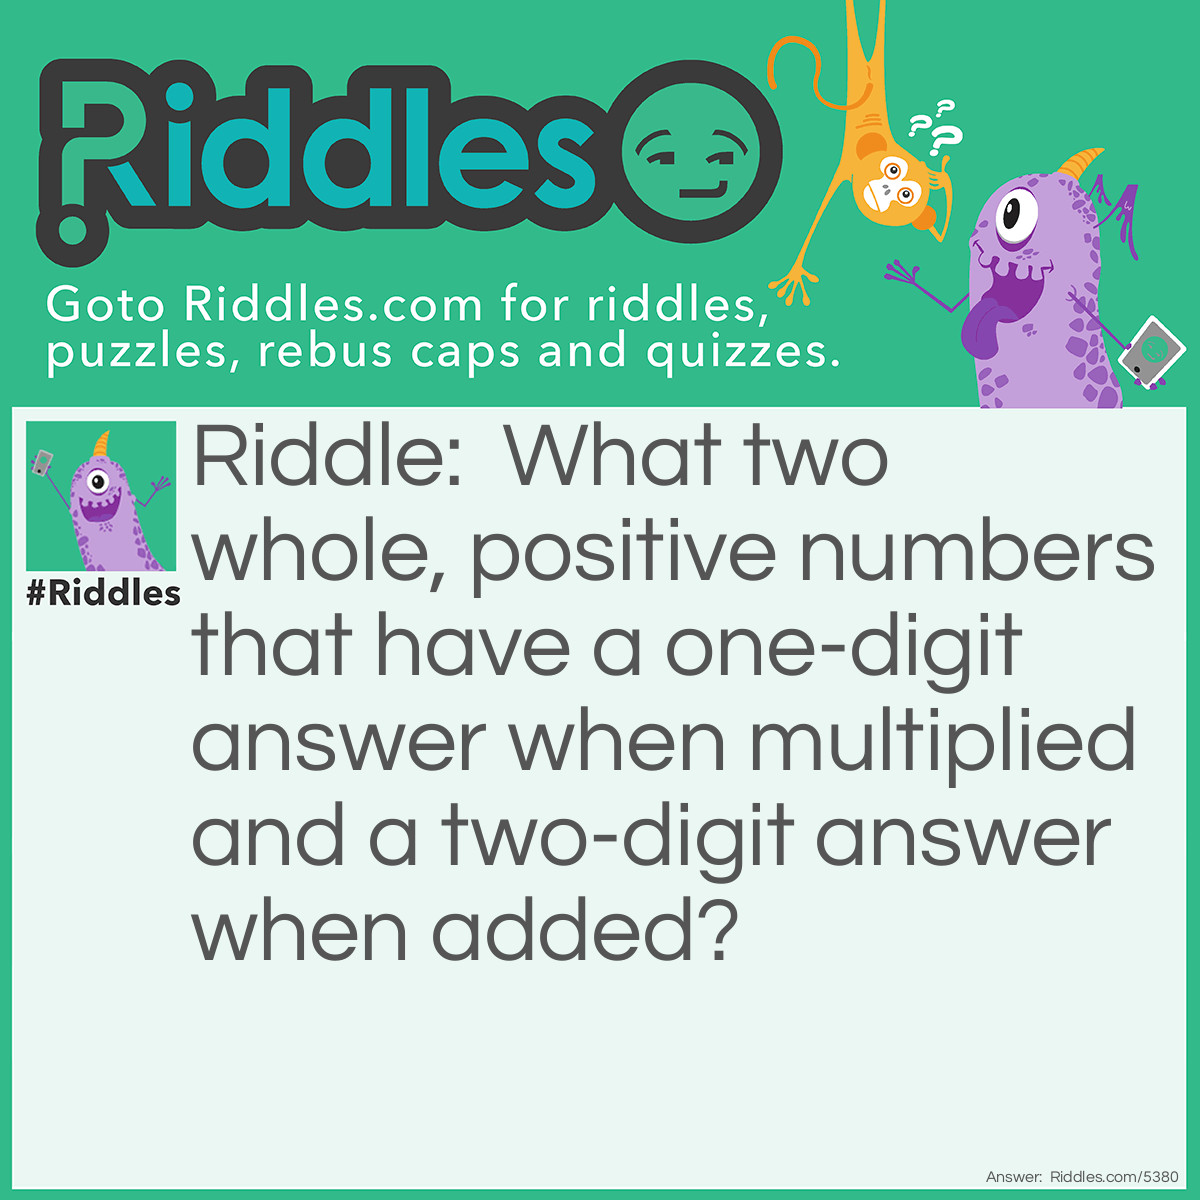 Riddle: What two whole, positive numbers that have a one-digit answer when multiplied and a two-digit answer when added? Answer: 1 and 9.